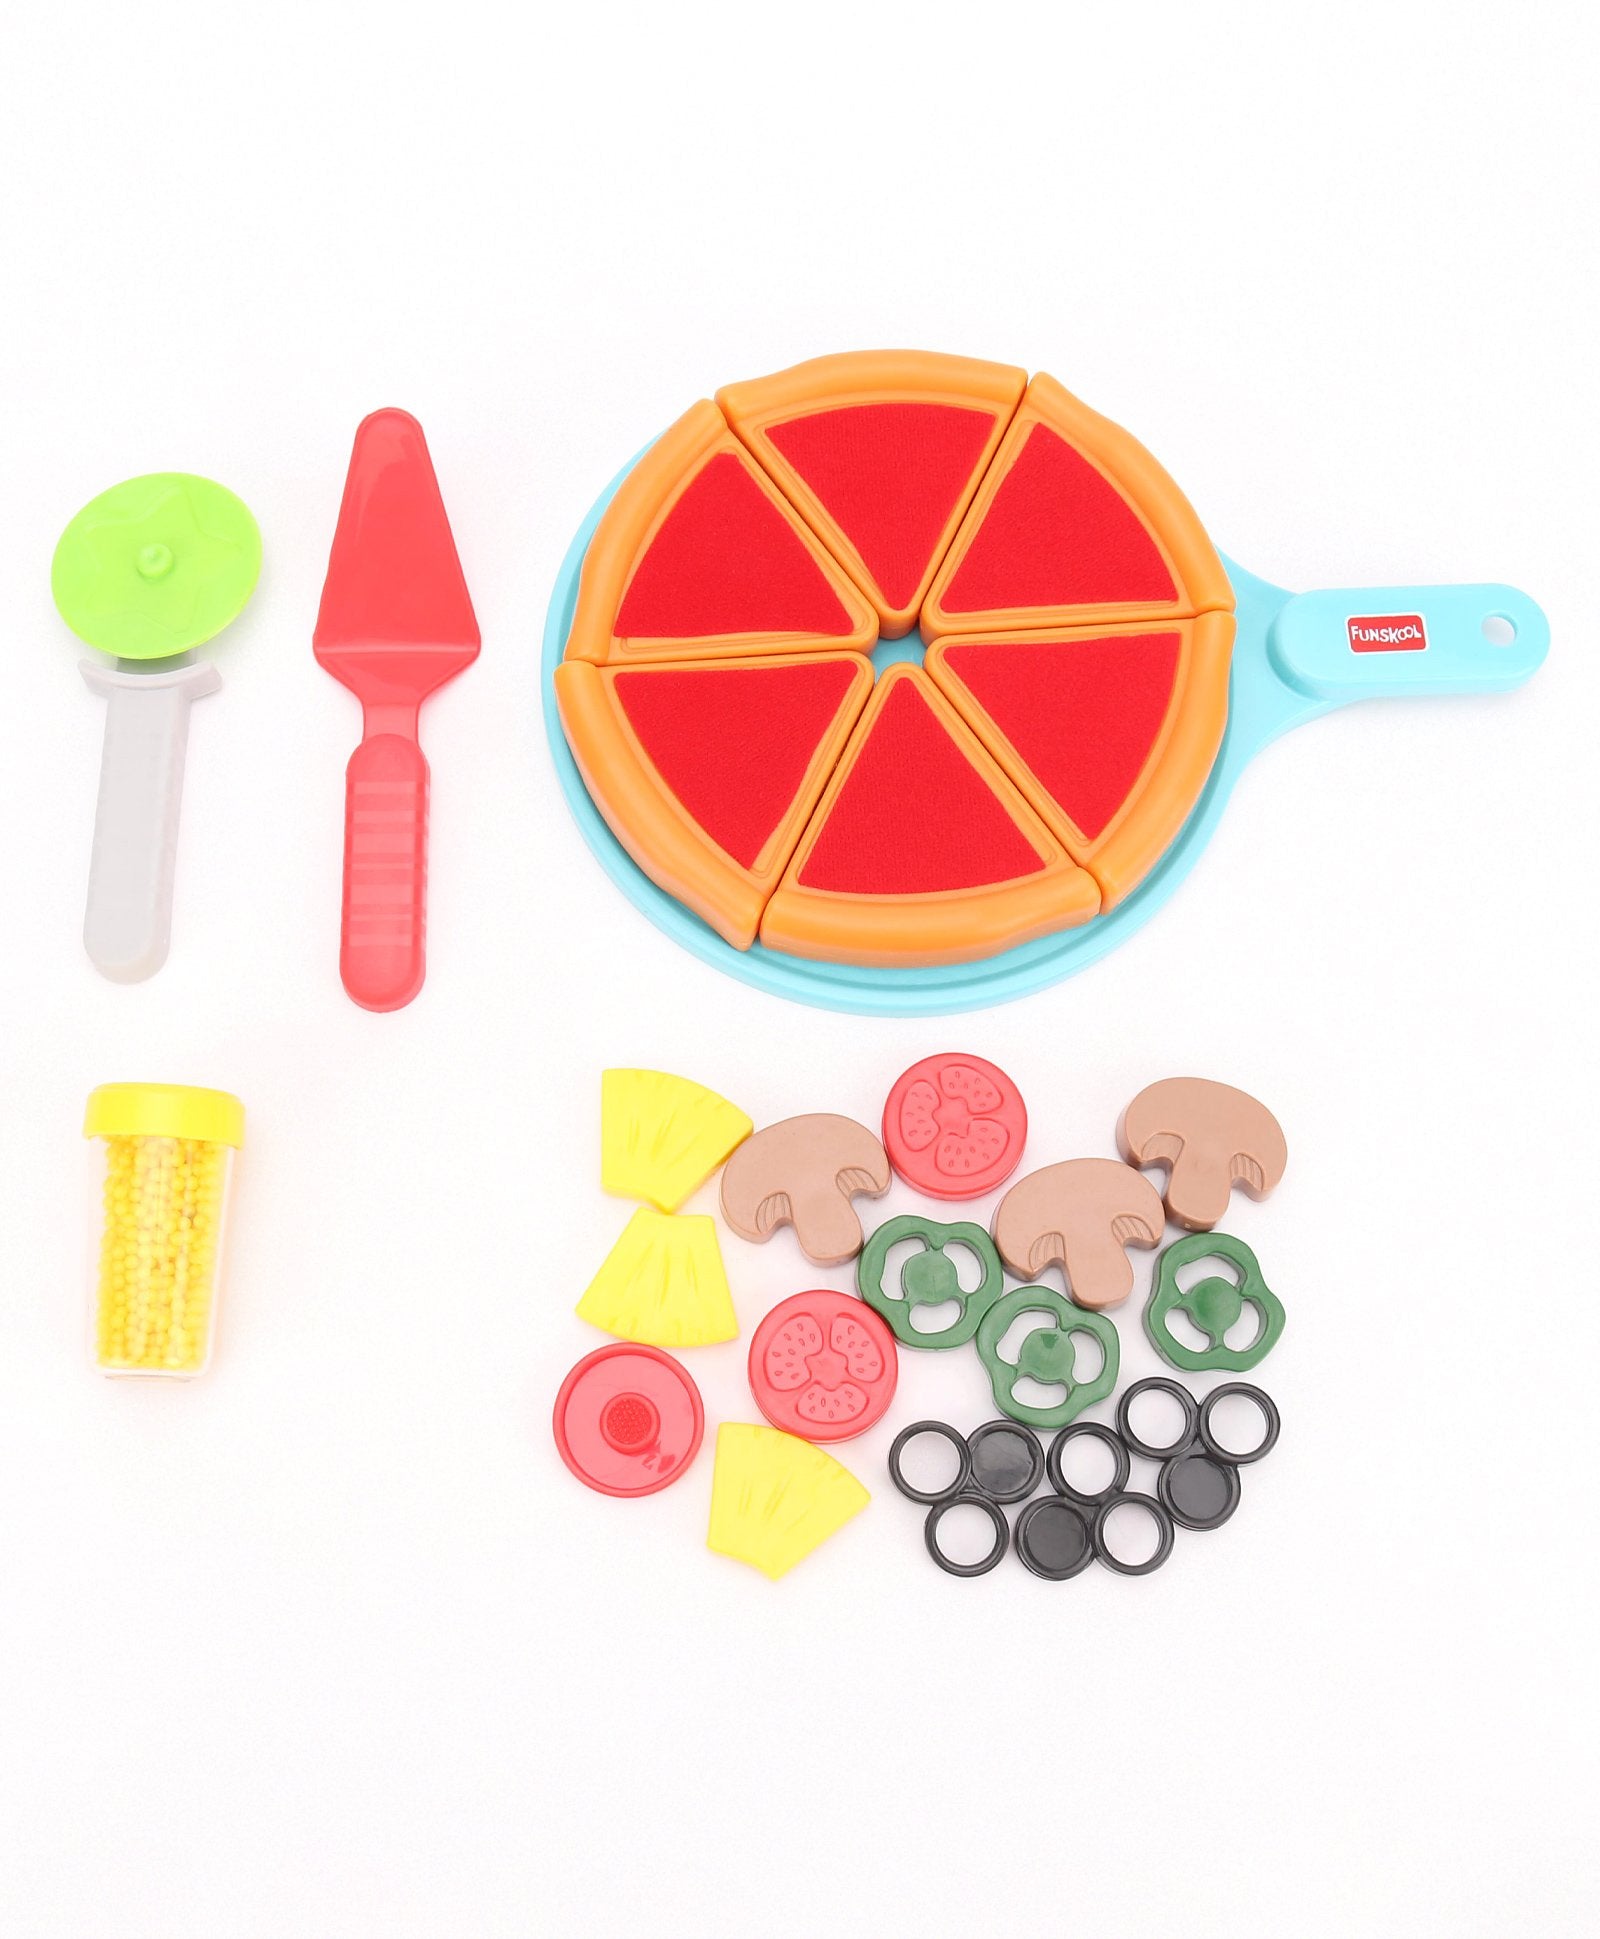 Funskool Giggles My First Pizza - Food Mix 'N Match Set with 15 toppings - Pretend Play Toy Set for Kids Ages 3+